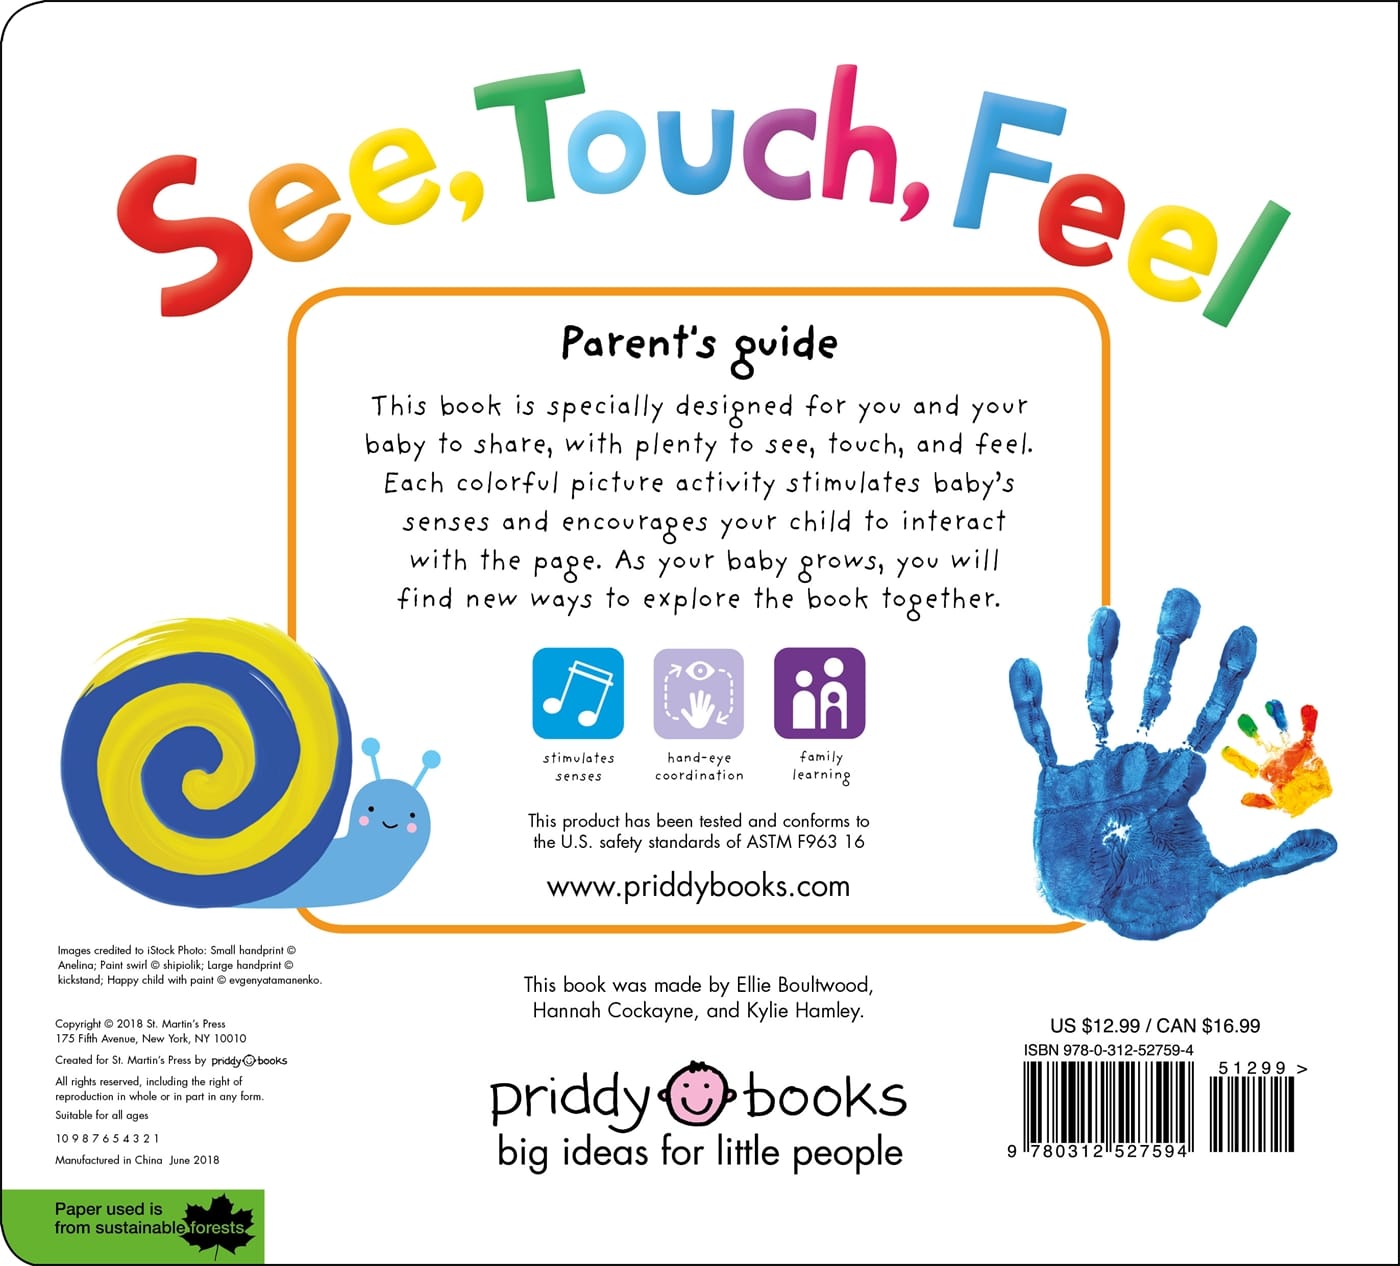 see-touch-feel_1304902.jpg